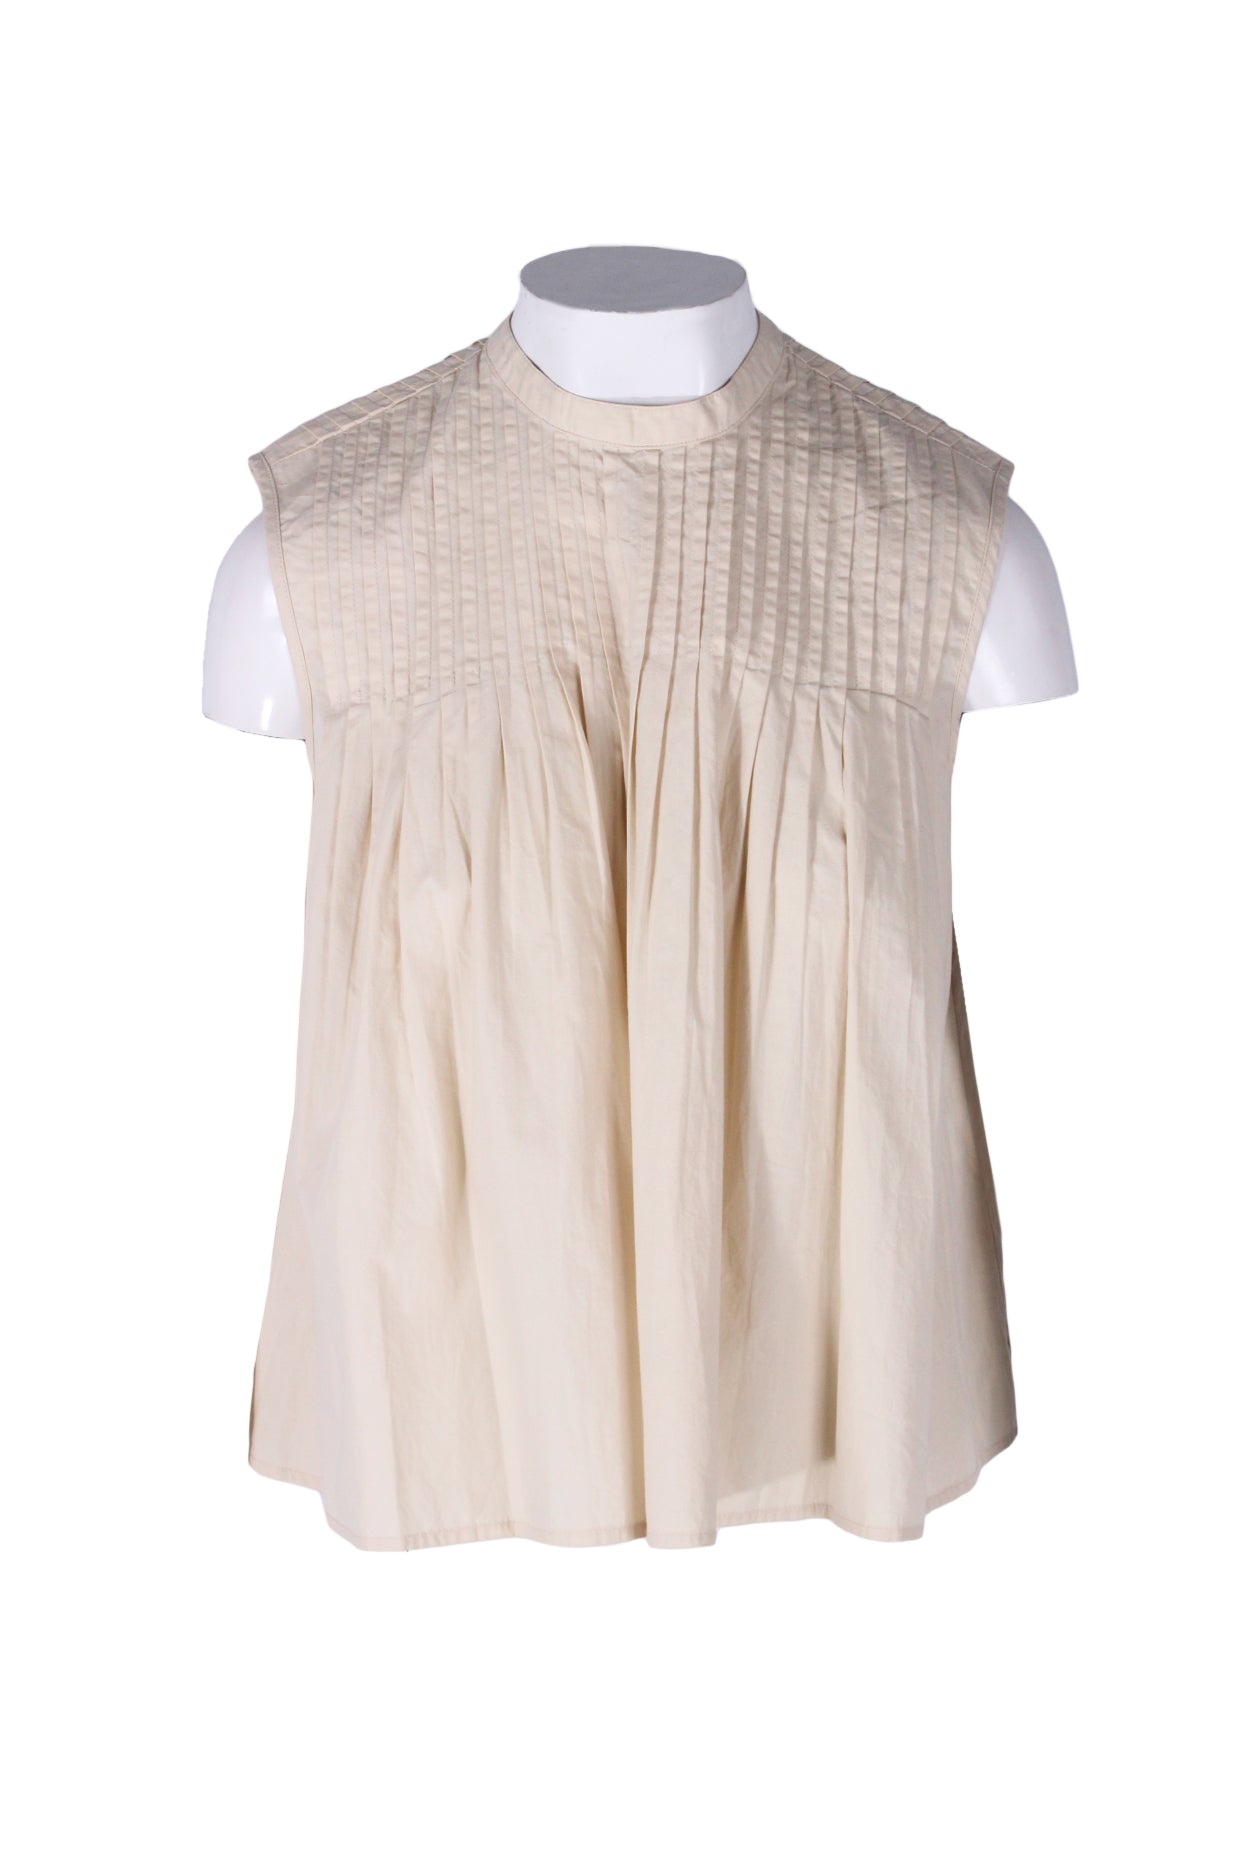 front angle deveaux new york beige sleeveless cotton top on feminine mannequin torso featuring pleated upper, round neckline, and loose fit. 